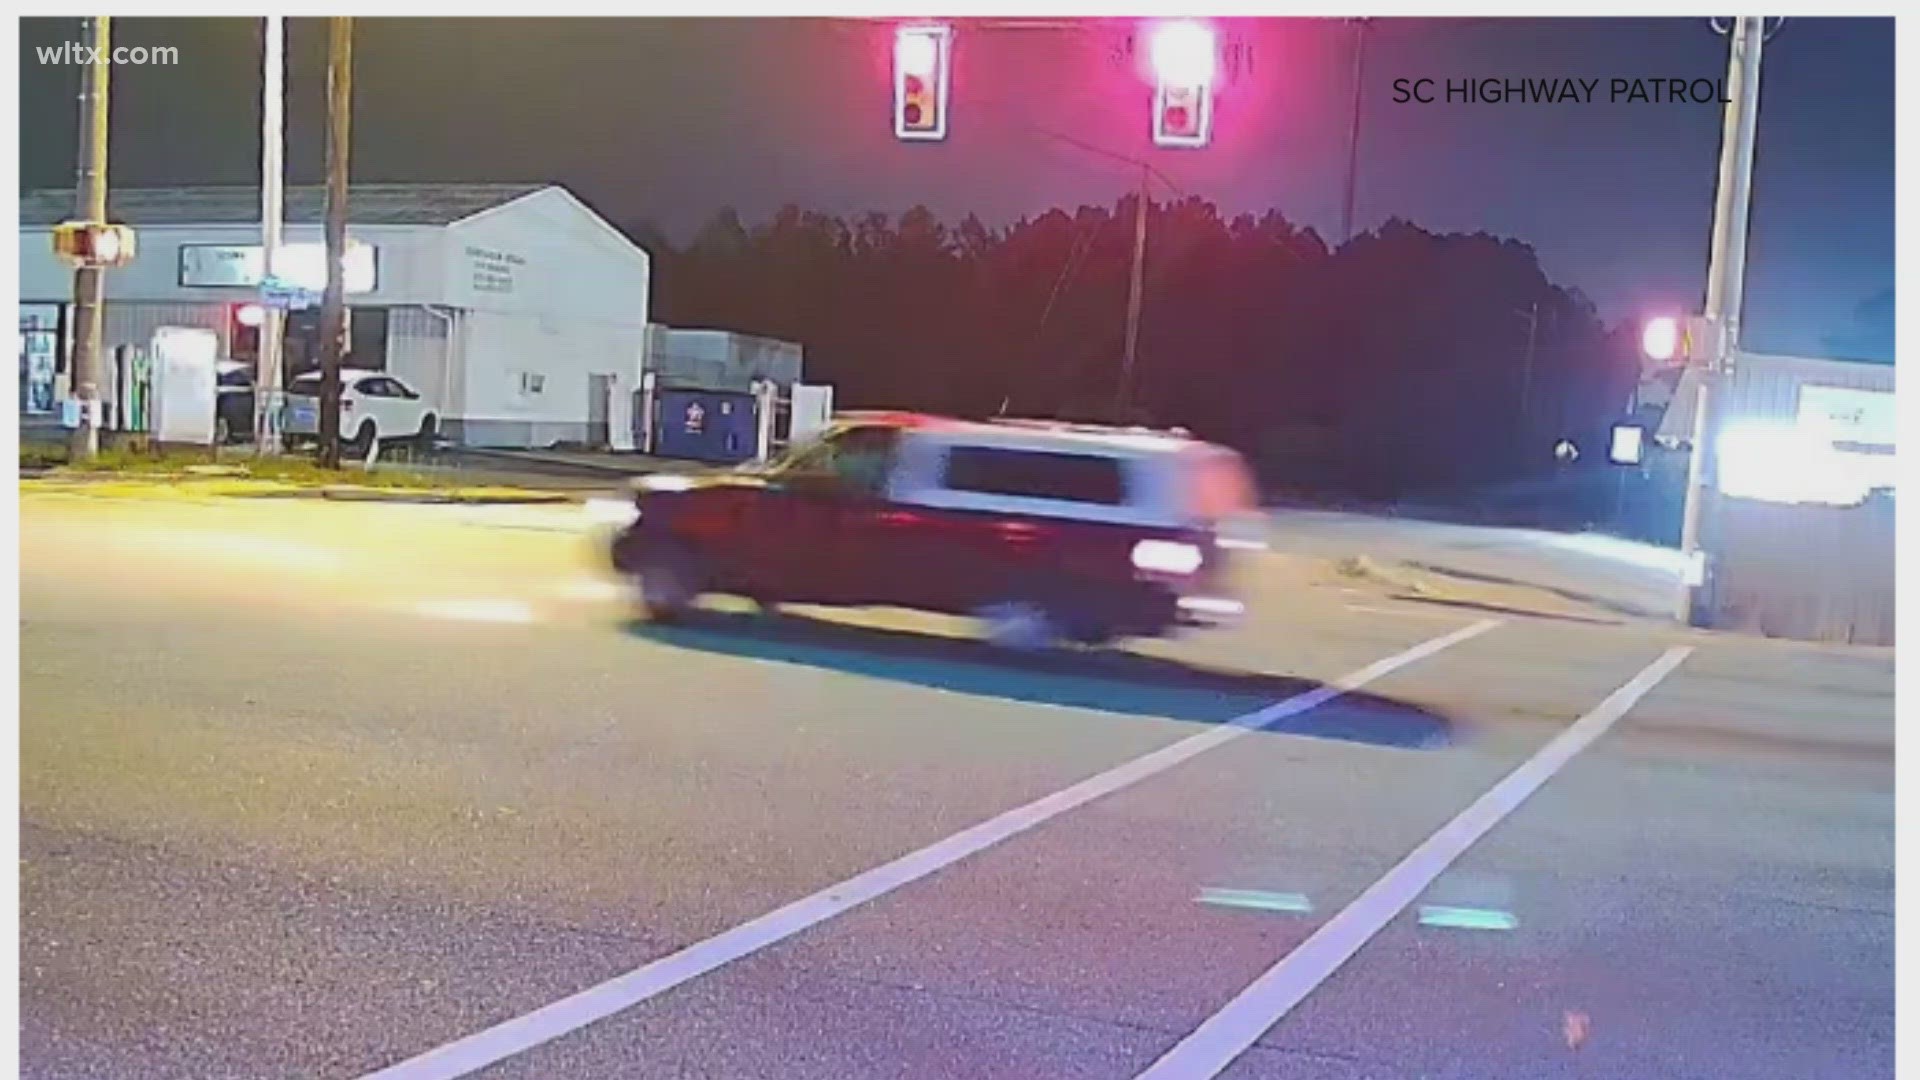 The South Carolina Highway Patrol has released an image of a vehicle suspected to be the one involved in a fatal hit-and-run incident in Richland County.